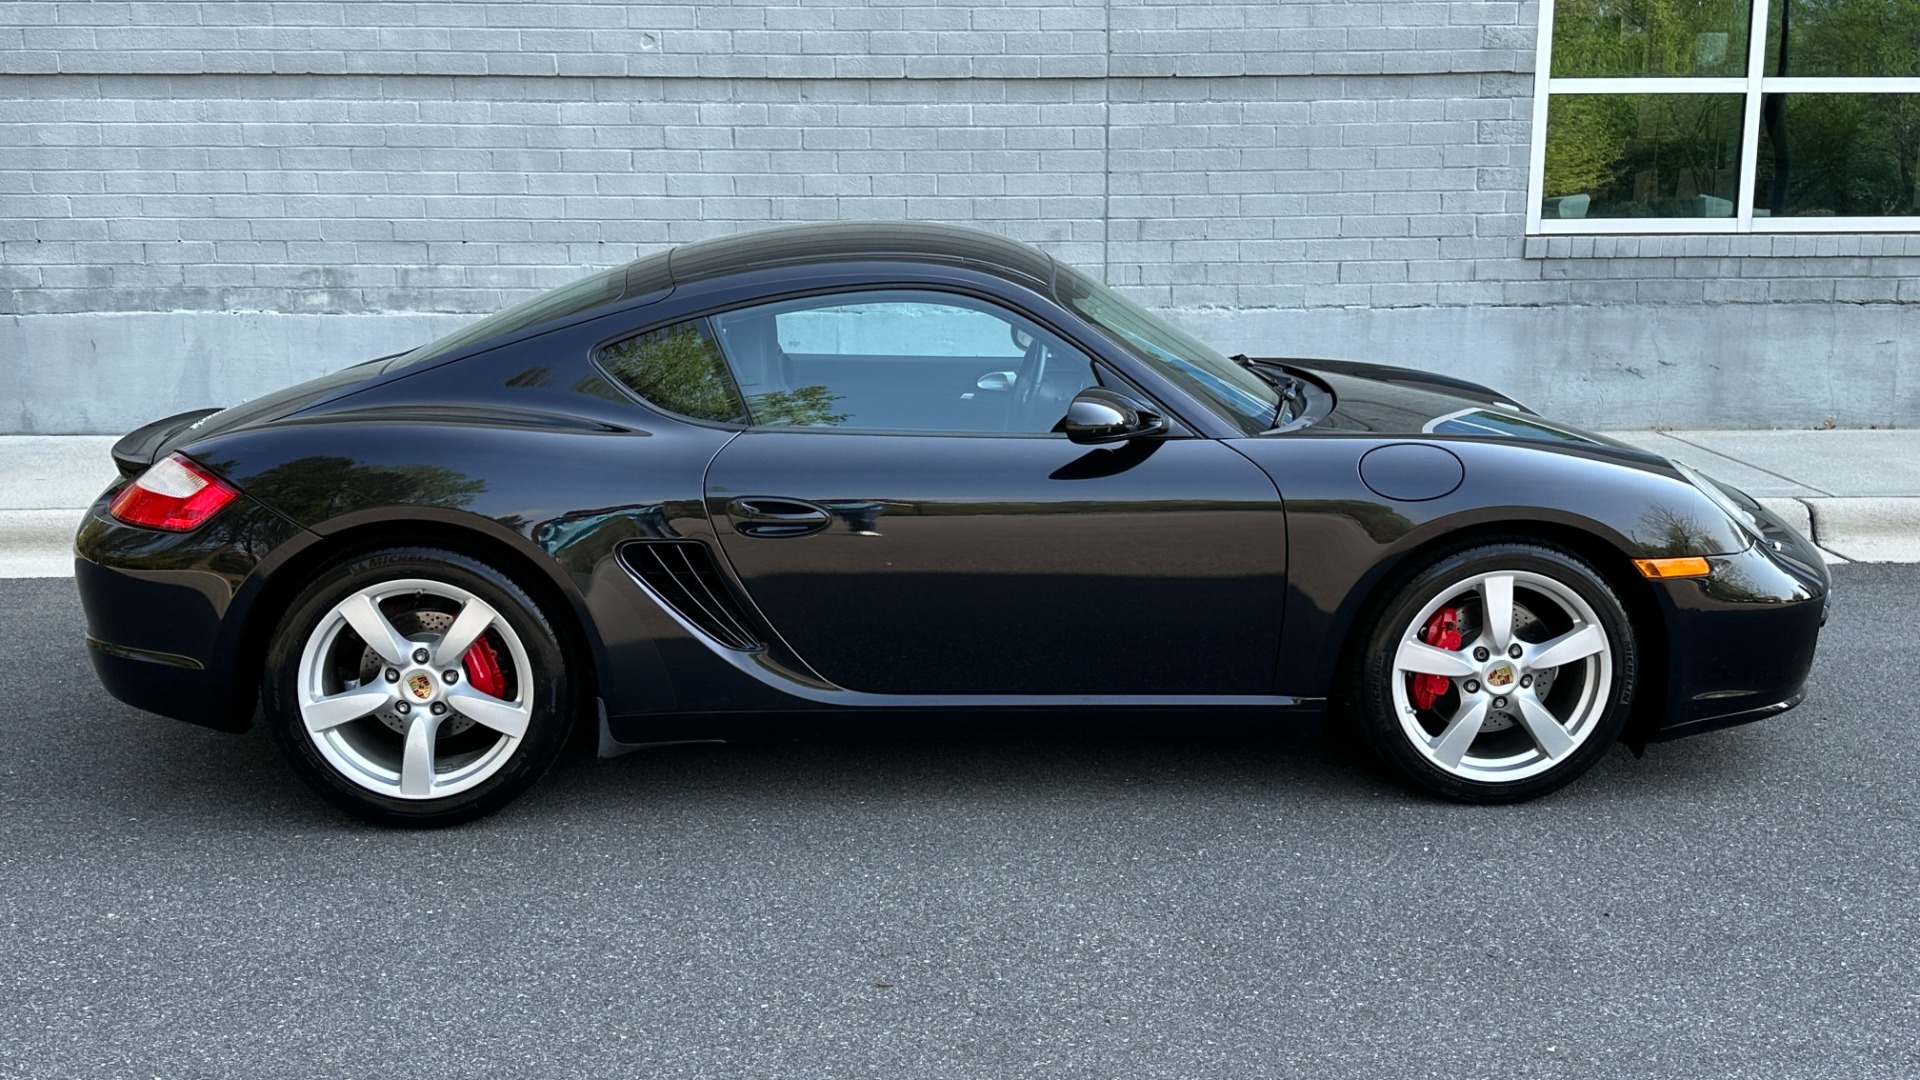 Used 2008 Porsche Cayman S / 6 SPEED / BOSE / PAINT PROTECTION / UPGRADED RADIO / POWER SEAT PKG for sale $29,800 at Formula Imports in Charlotte NC 28227 3